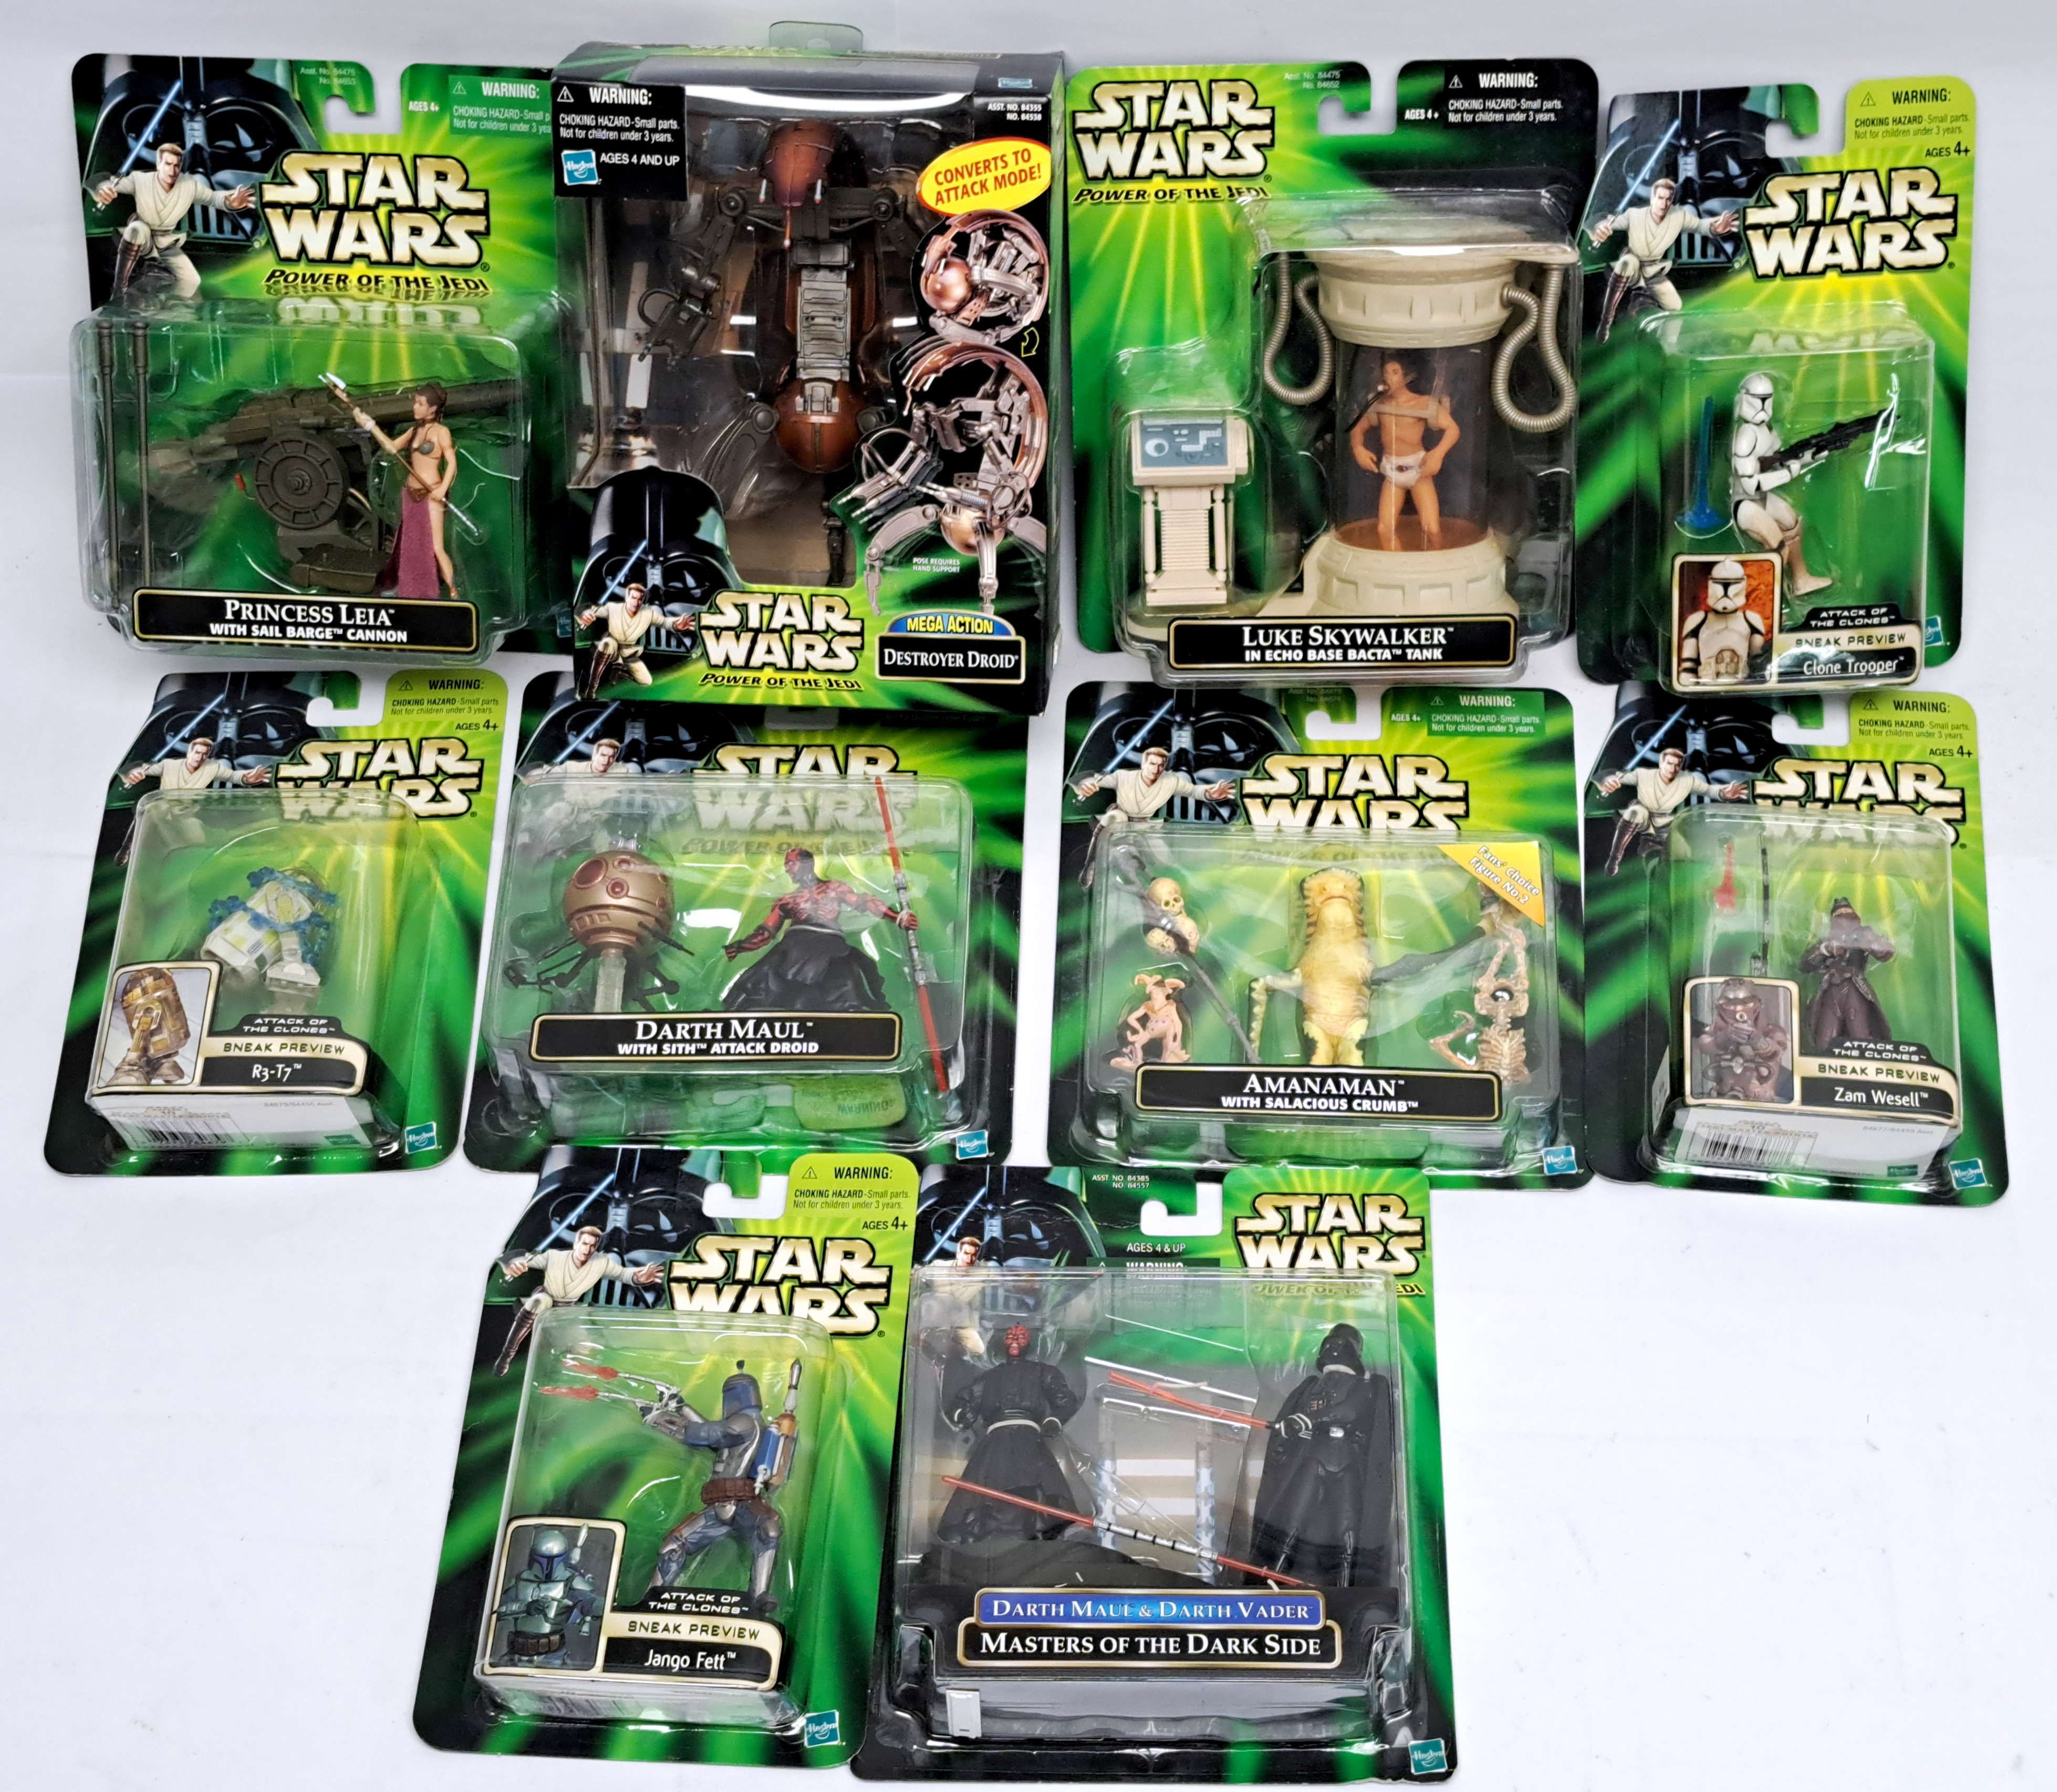 Star Wars Kenner Power of the Jedi mixed sealed lot Amanaman, Darth Maul, Deluxe Sneak preview fi...